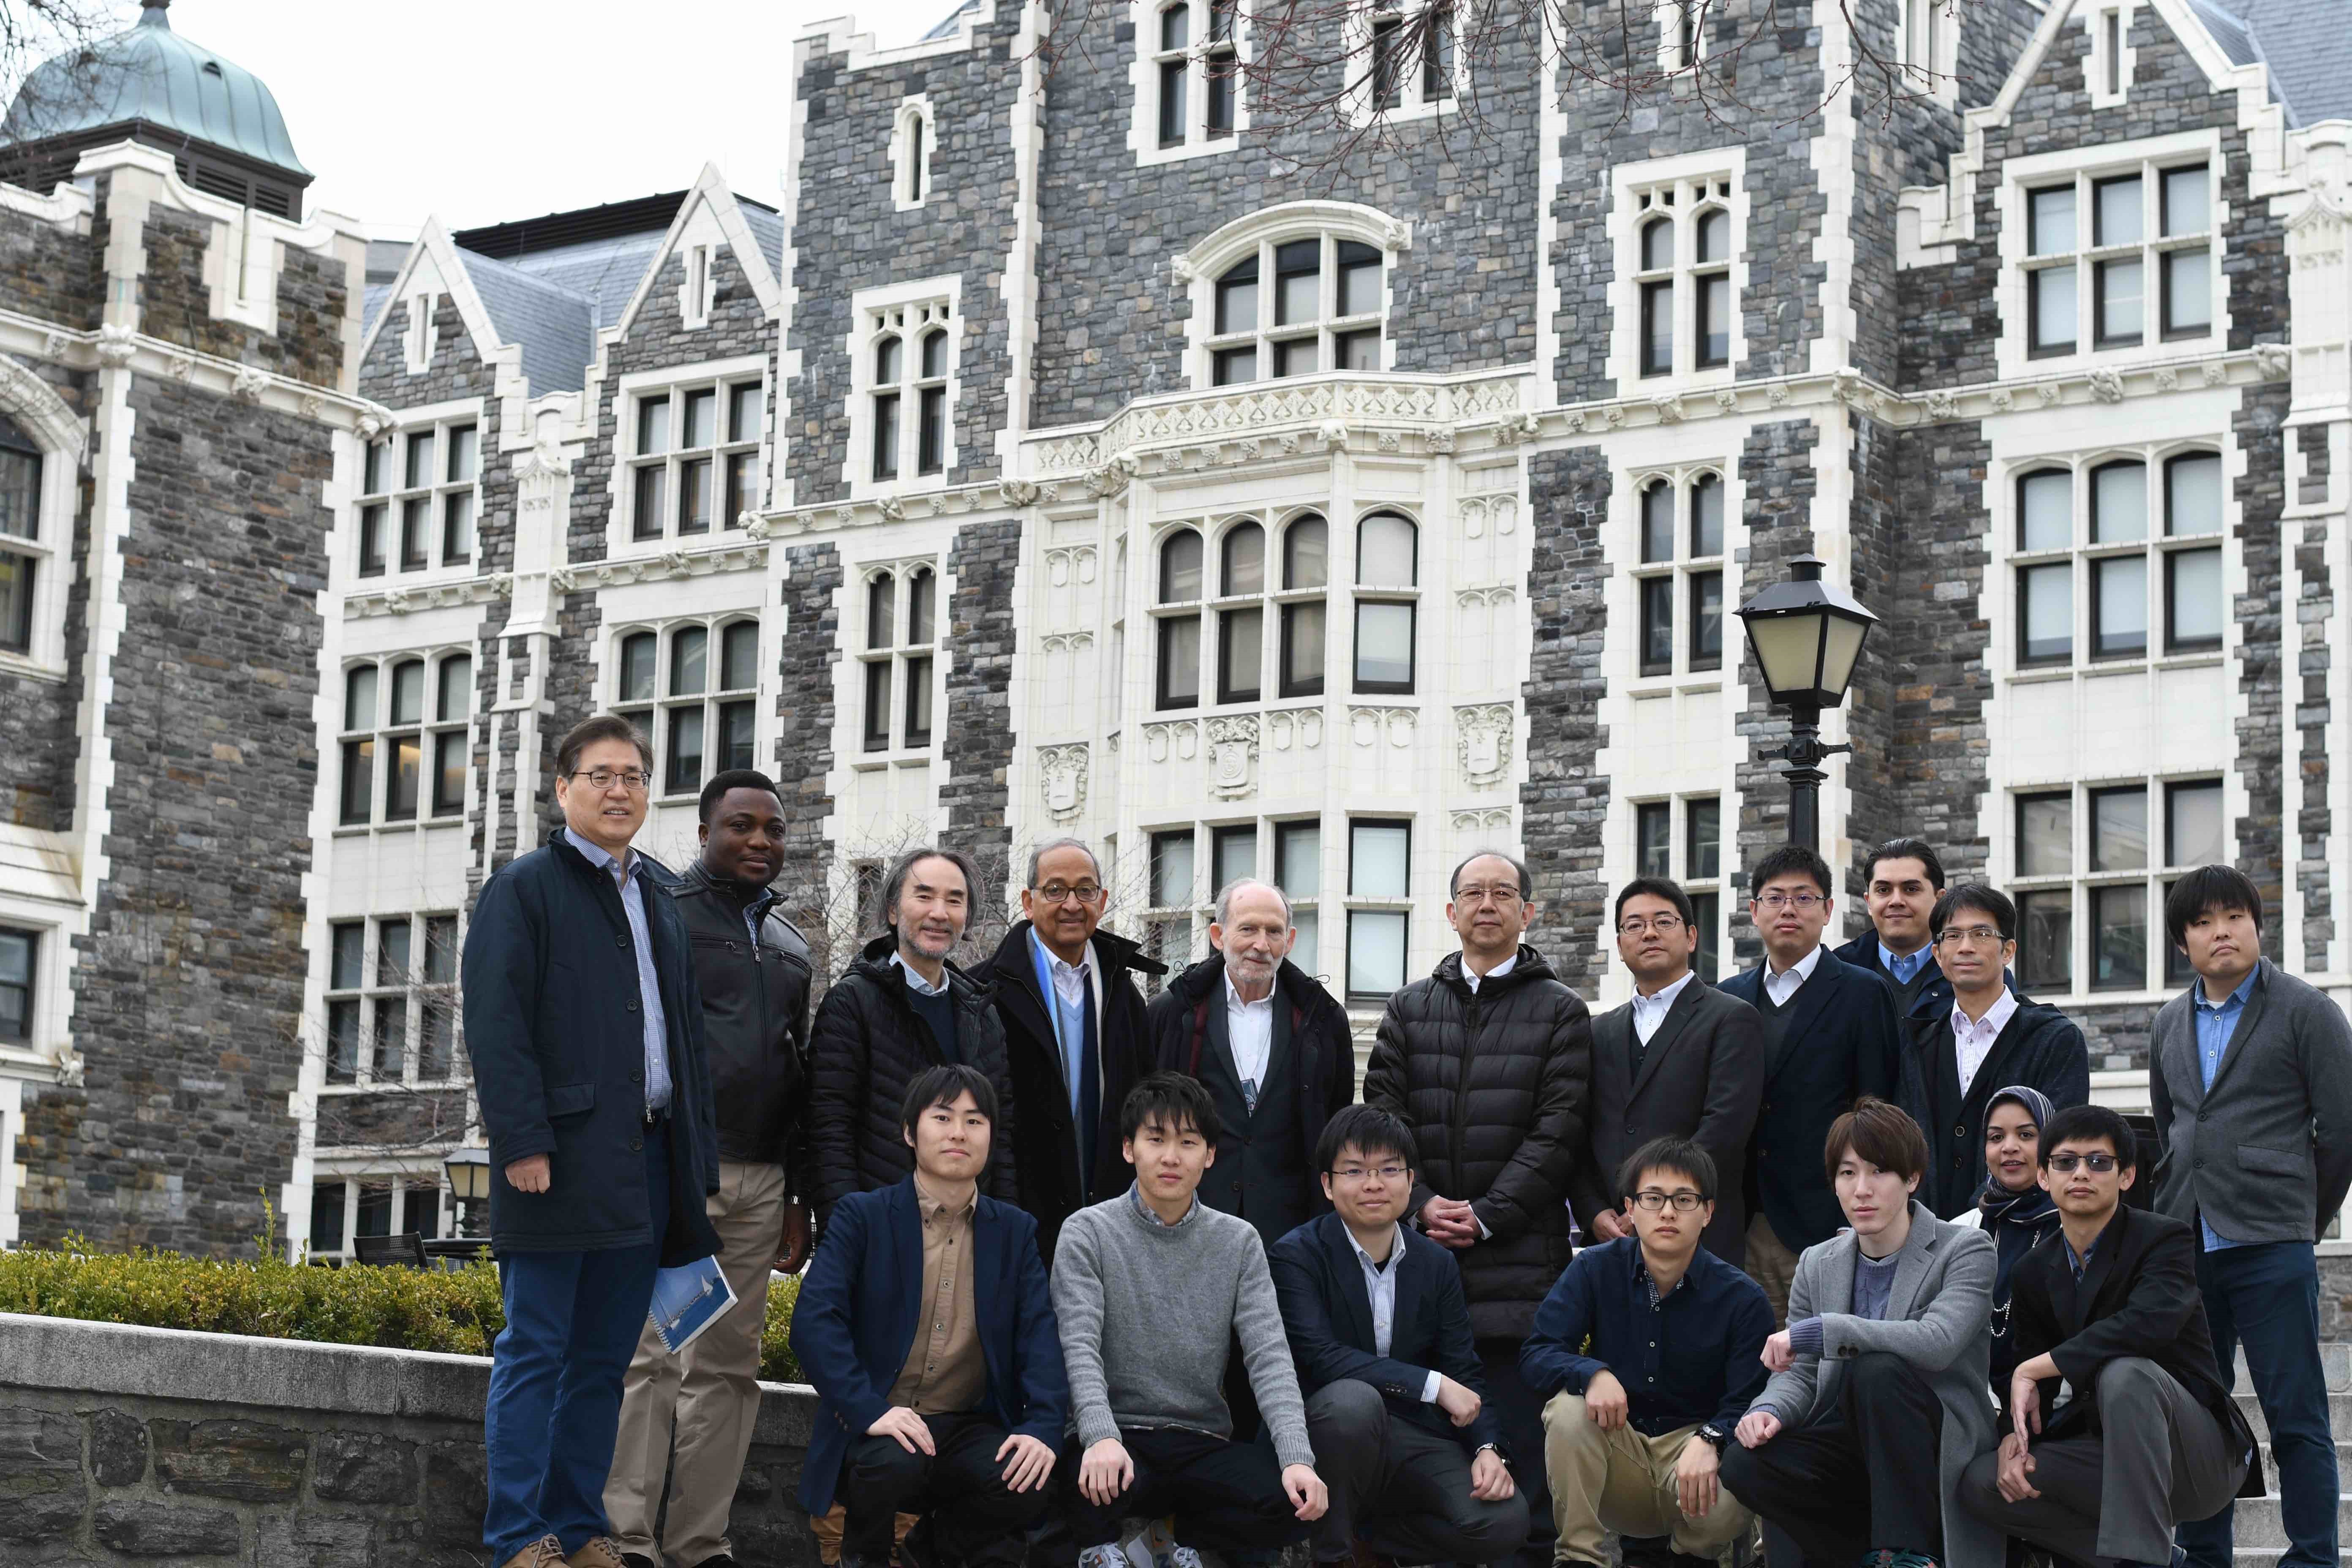 The Kyutech of Japan and CCNY of USA teams during their regular annual workshop meeting at CCNY under NSF Grant JUNO2